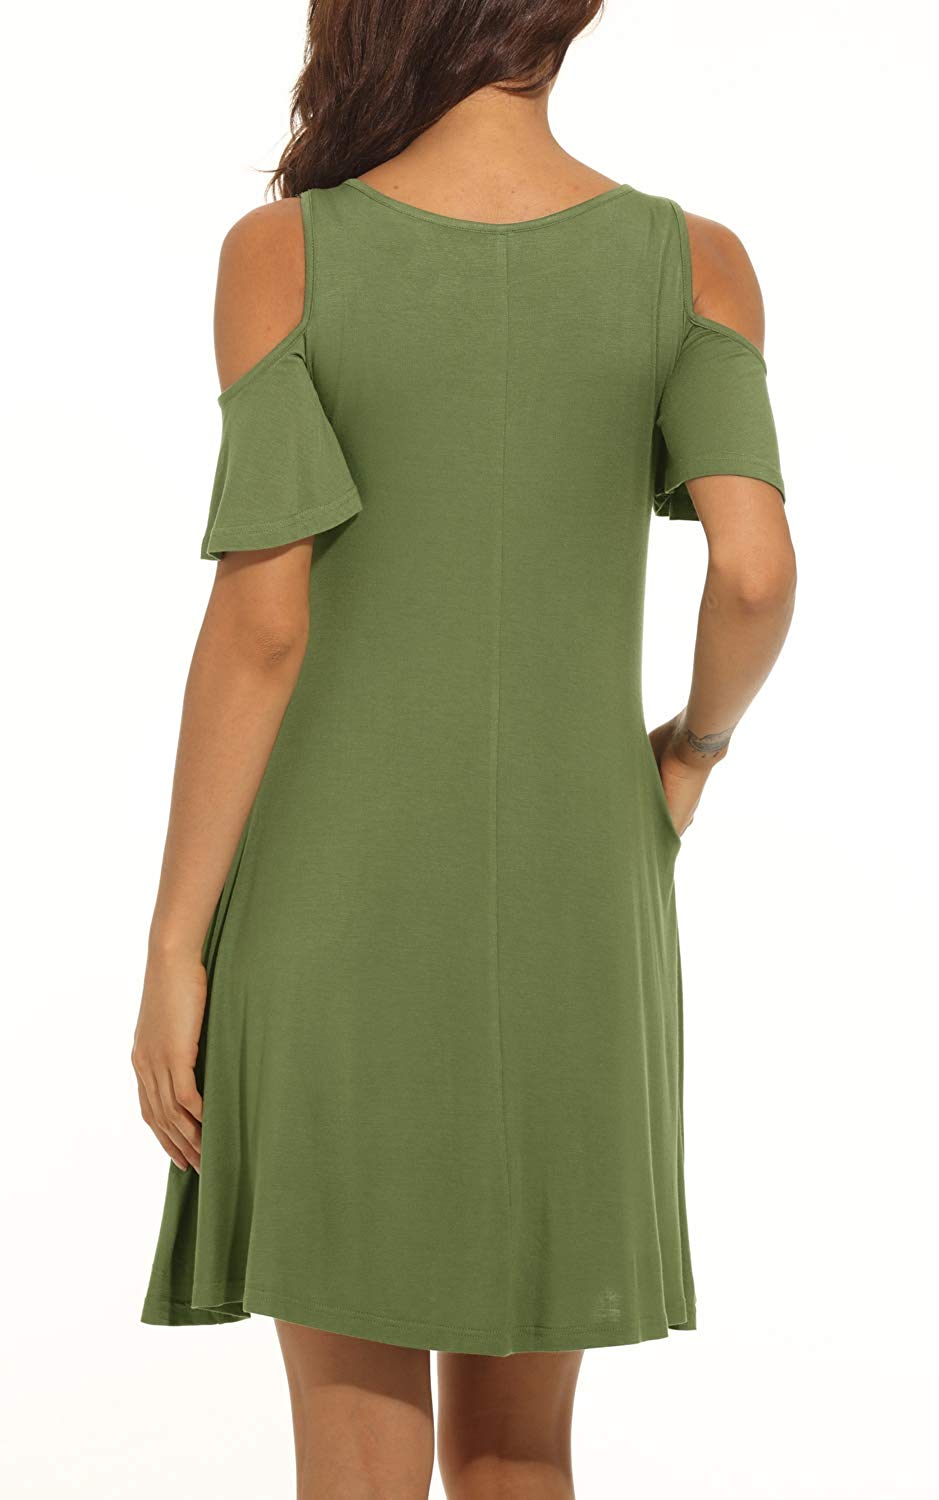 ladies army green dress - loose fit ruffle sleeve cold shoulder outfit